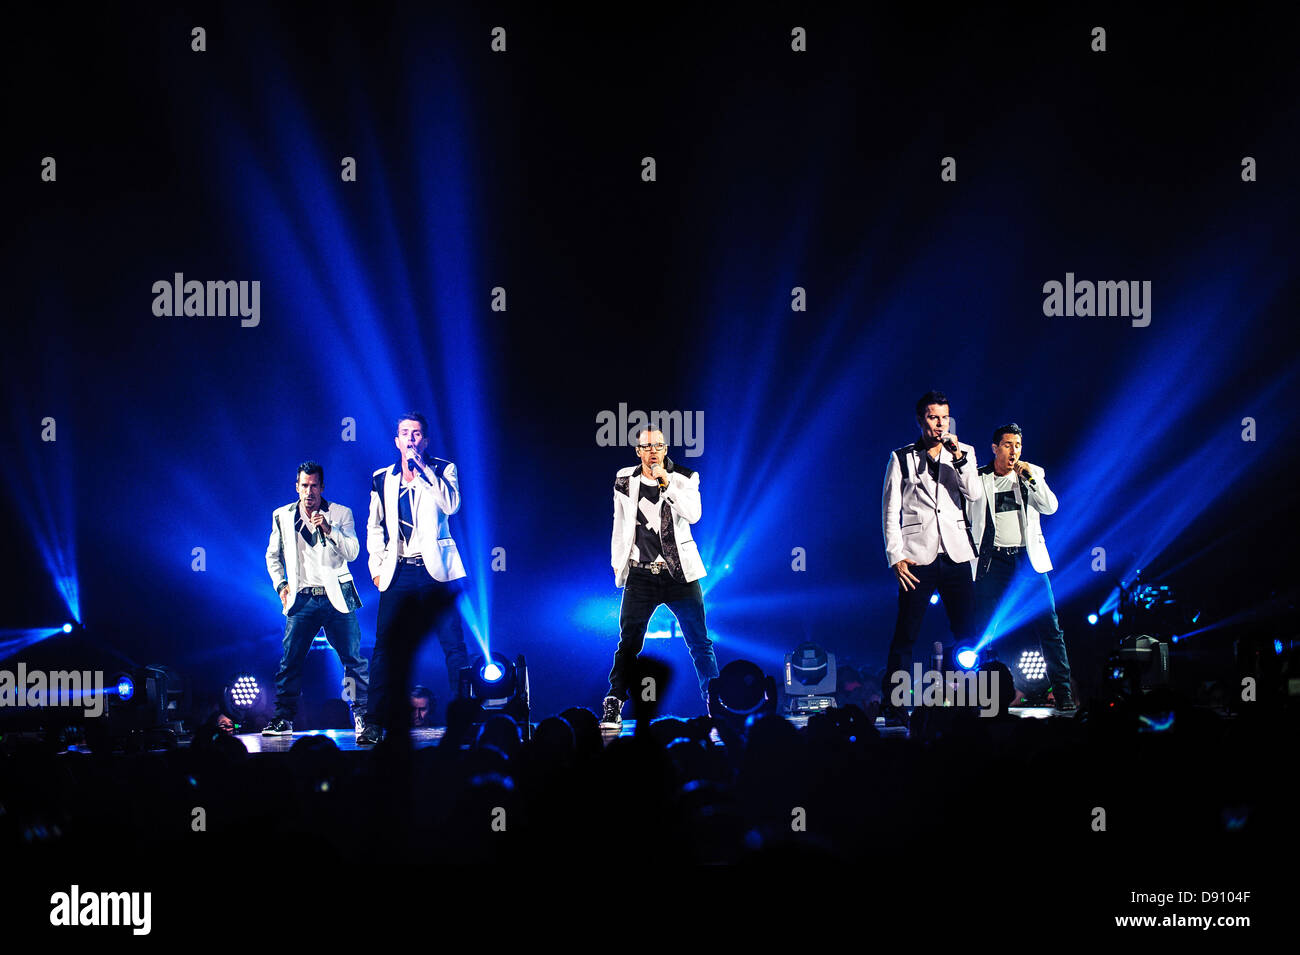 Toronto, Ontario, Canada. June 7, 2013. American boy band 'New Kids on the Block' (NKOTB) perfrom at Air Canada Centre in Toronto during their 'The Package Tour Credit:  ZUMA Press, Inc./Alamy Live News Stock Photo